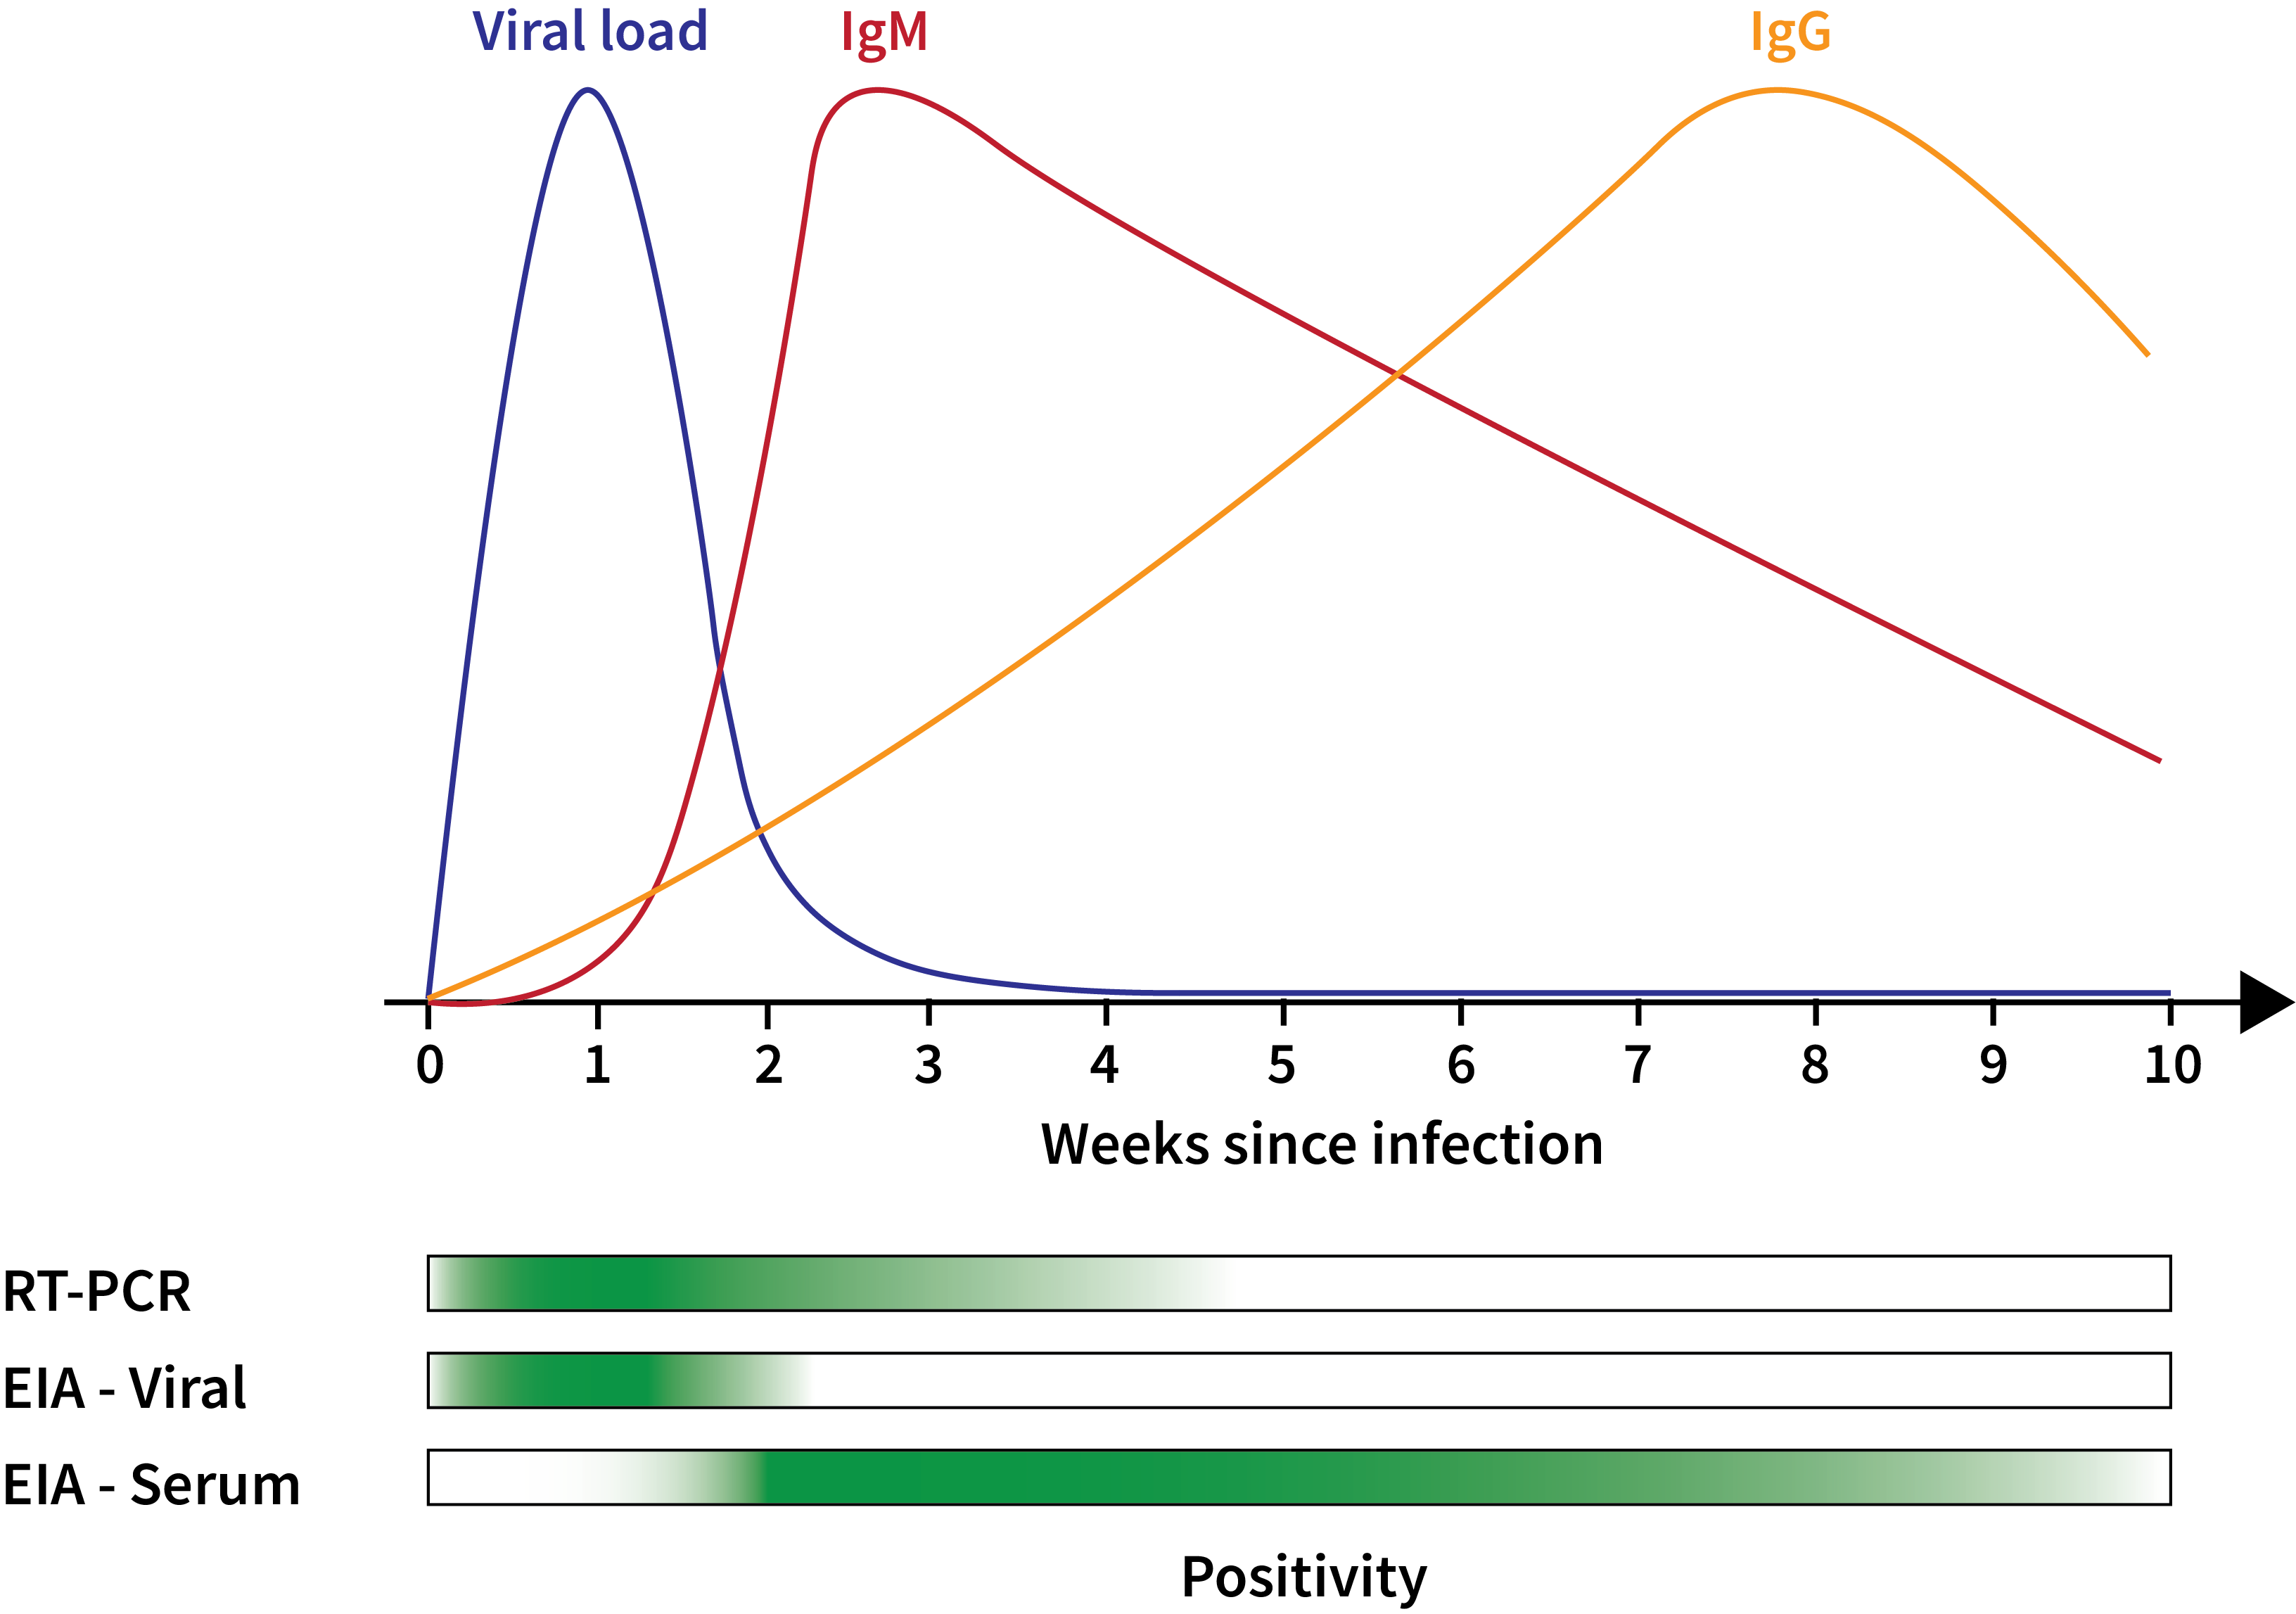 Figure 2: Summary of Diagnostic Technologies used in COVID-19 Testing. The immune response to SARS-CoV-2 means that different diagnostic approaches offer different views of COVID-19. Early in the infection course, viral load is high. This means that PCR-based testing and EIA testing for antigens are likely to return positives (as indicated by the green bars at the bottom). As viral load decreases, EIA antigen tests become negative, but PCR-based tests can still detect even very low viral loads. From a serological perspective, IgM peaks in the first few weeks following infection and then decreases, while IgG peaks much later in the infection course. Therefore, serological tests are likely to return positives in first few months following the acute infection course. Additional detail is available above and in several analyses and reviews (1, 678, 705, 720).